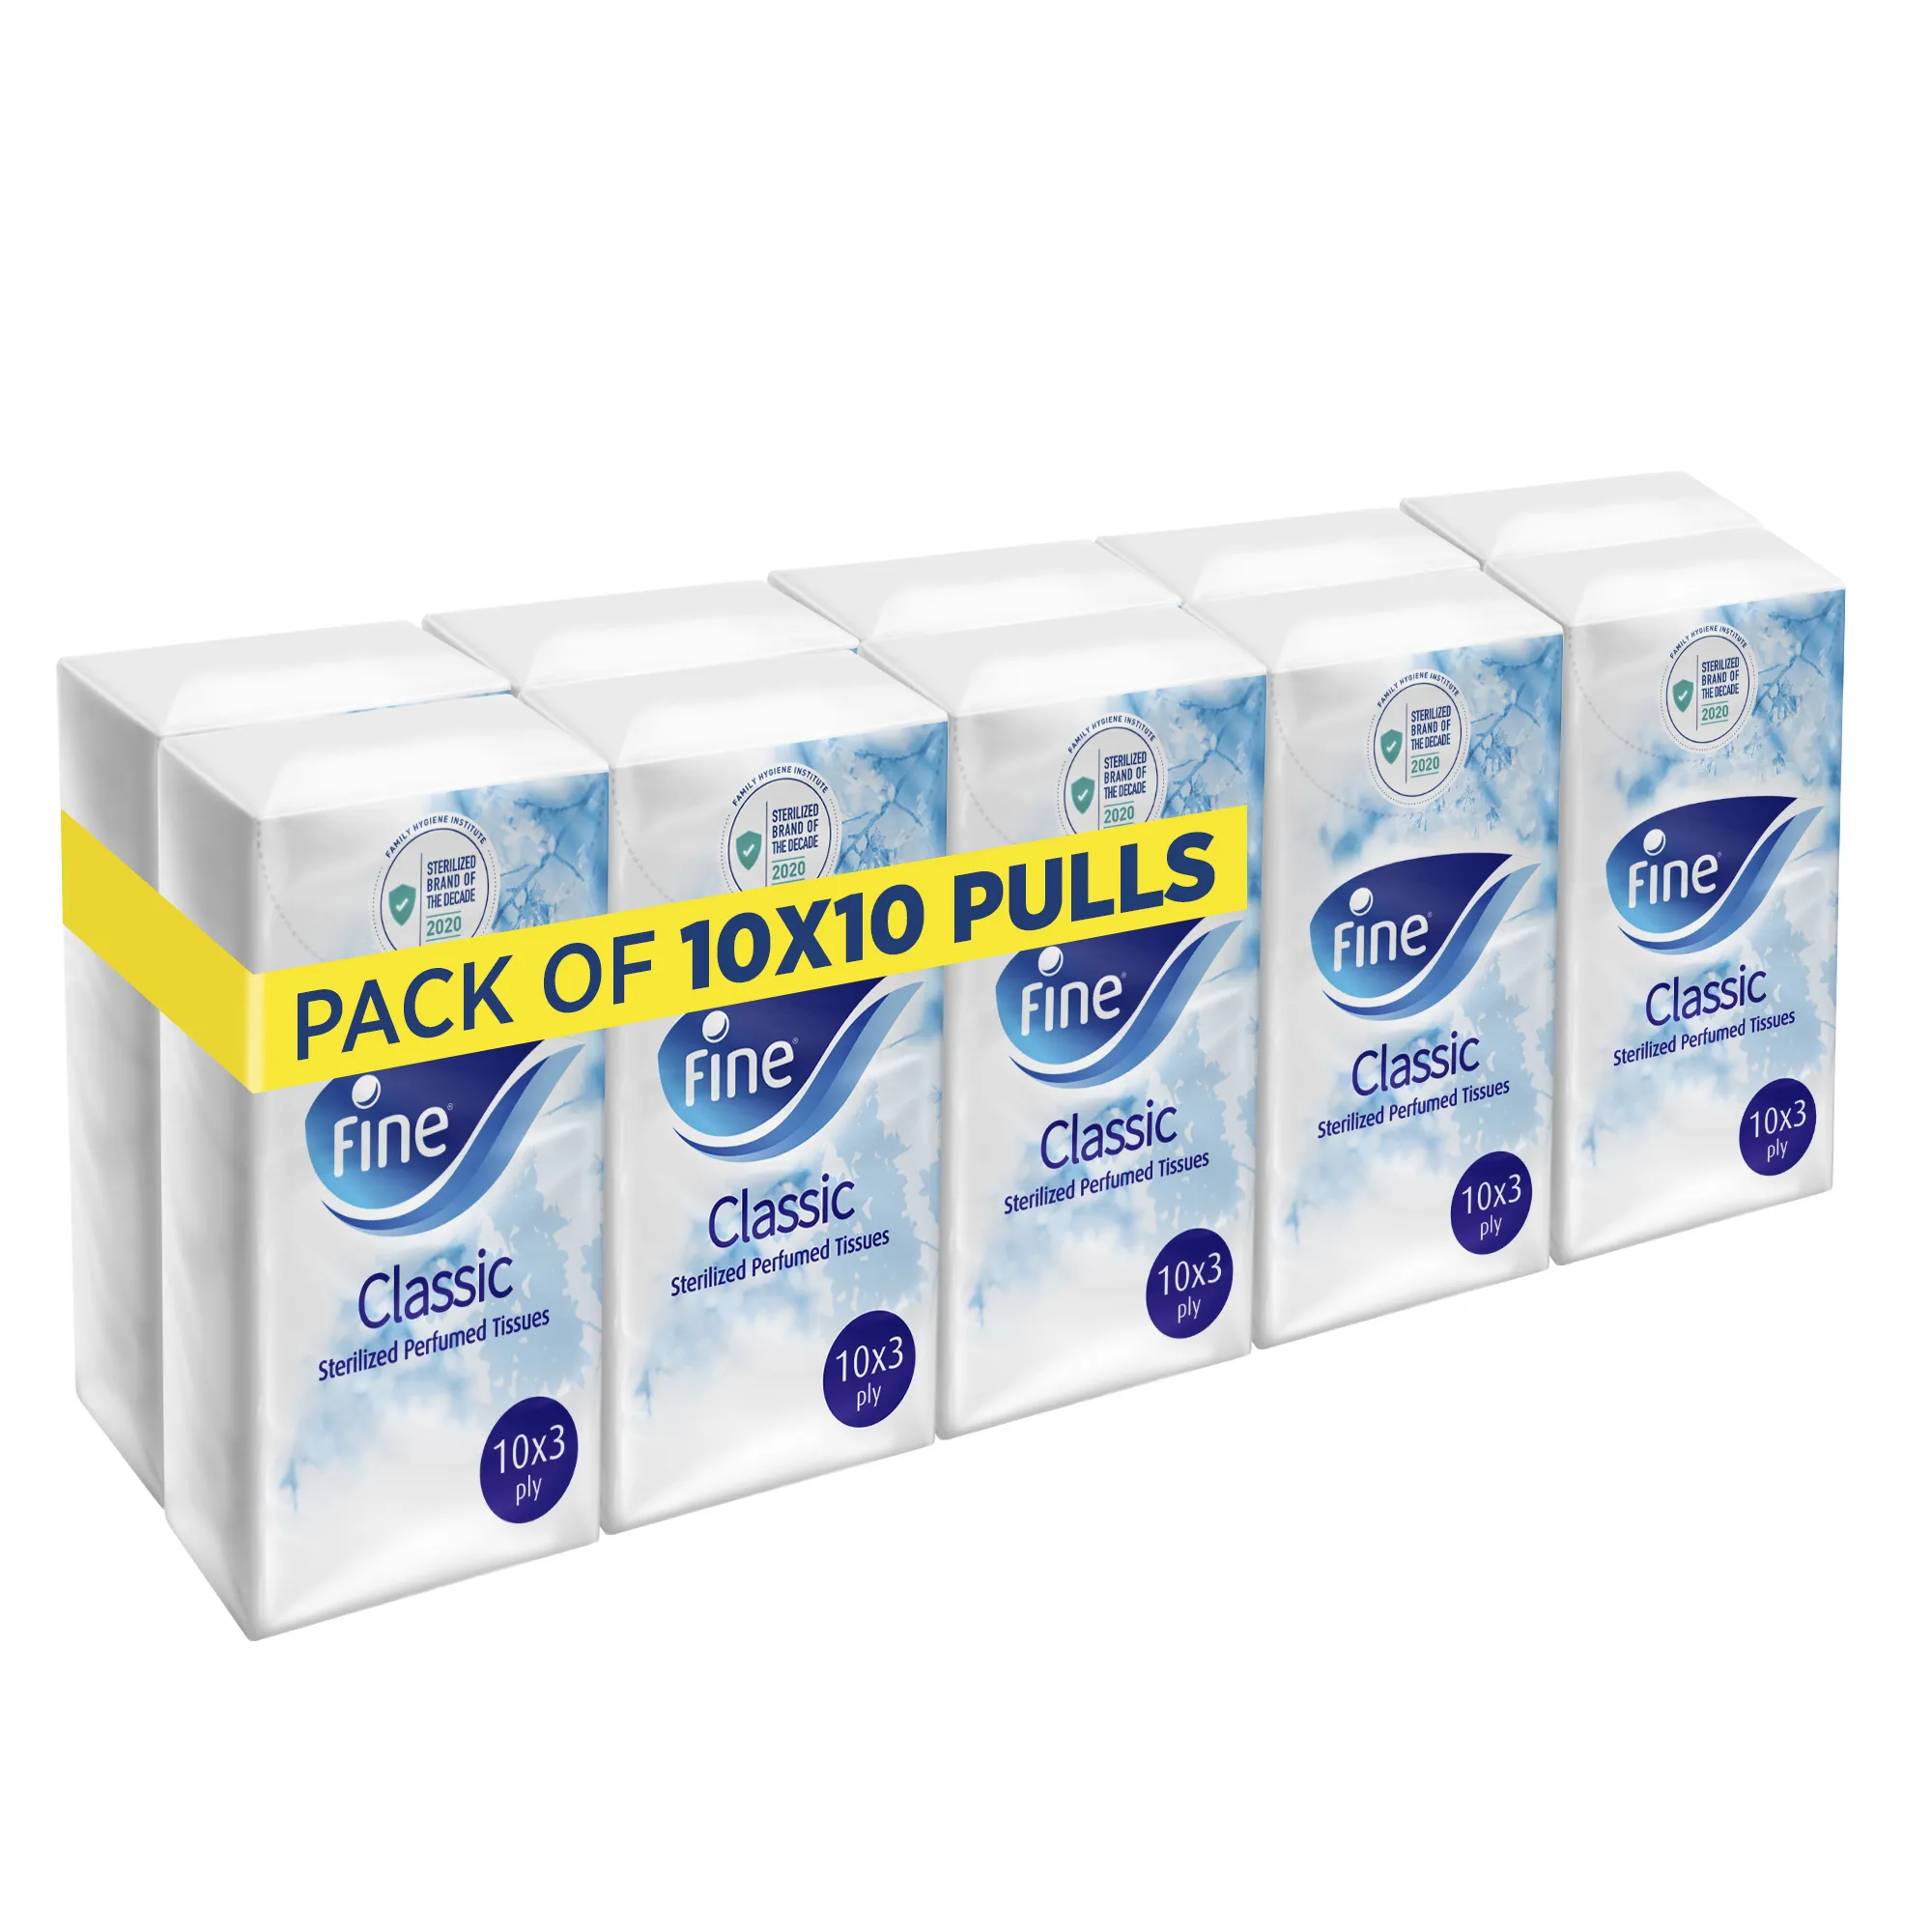 Fine, Facial Tissues, Classic Pocket, 10x3 Ply White Tissues, pack of 10, 100 tissues